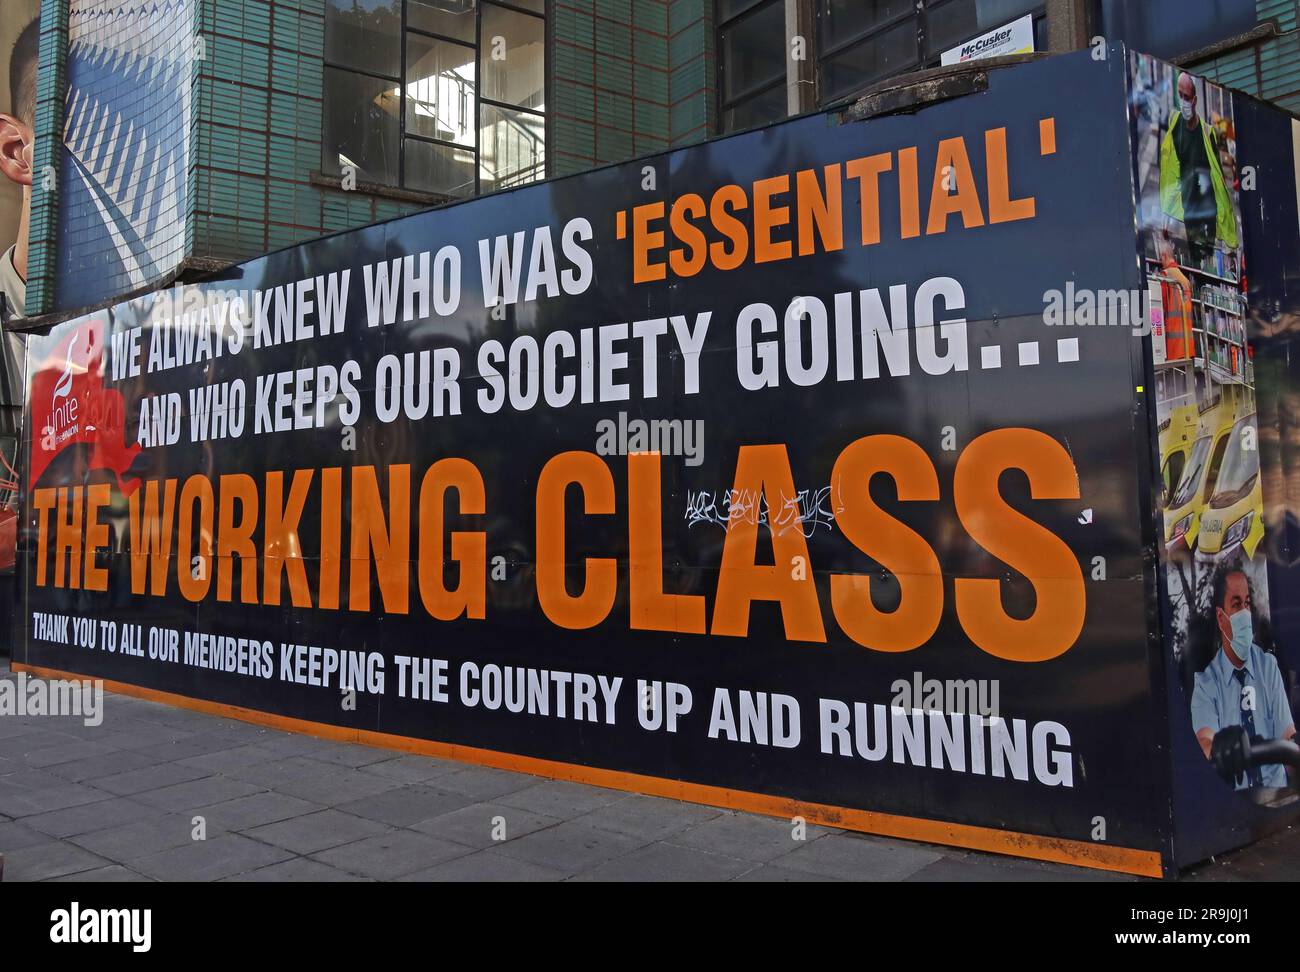 We always knew who was Essential - The working class, 96-98 High St, Belfast , Northern Ireland, UK, BT1 2AG Stock Photo